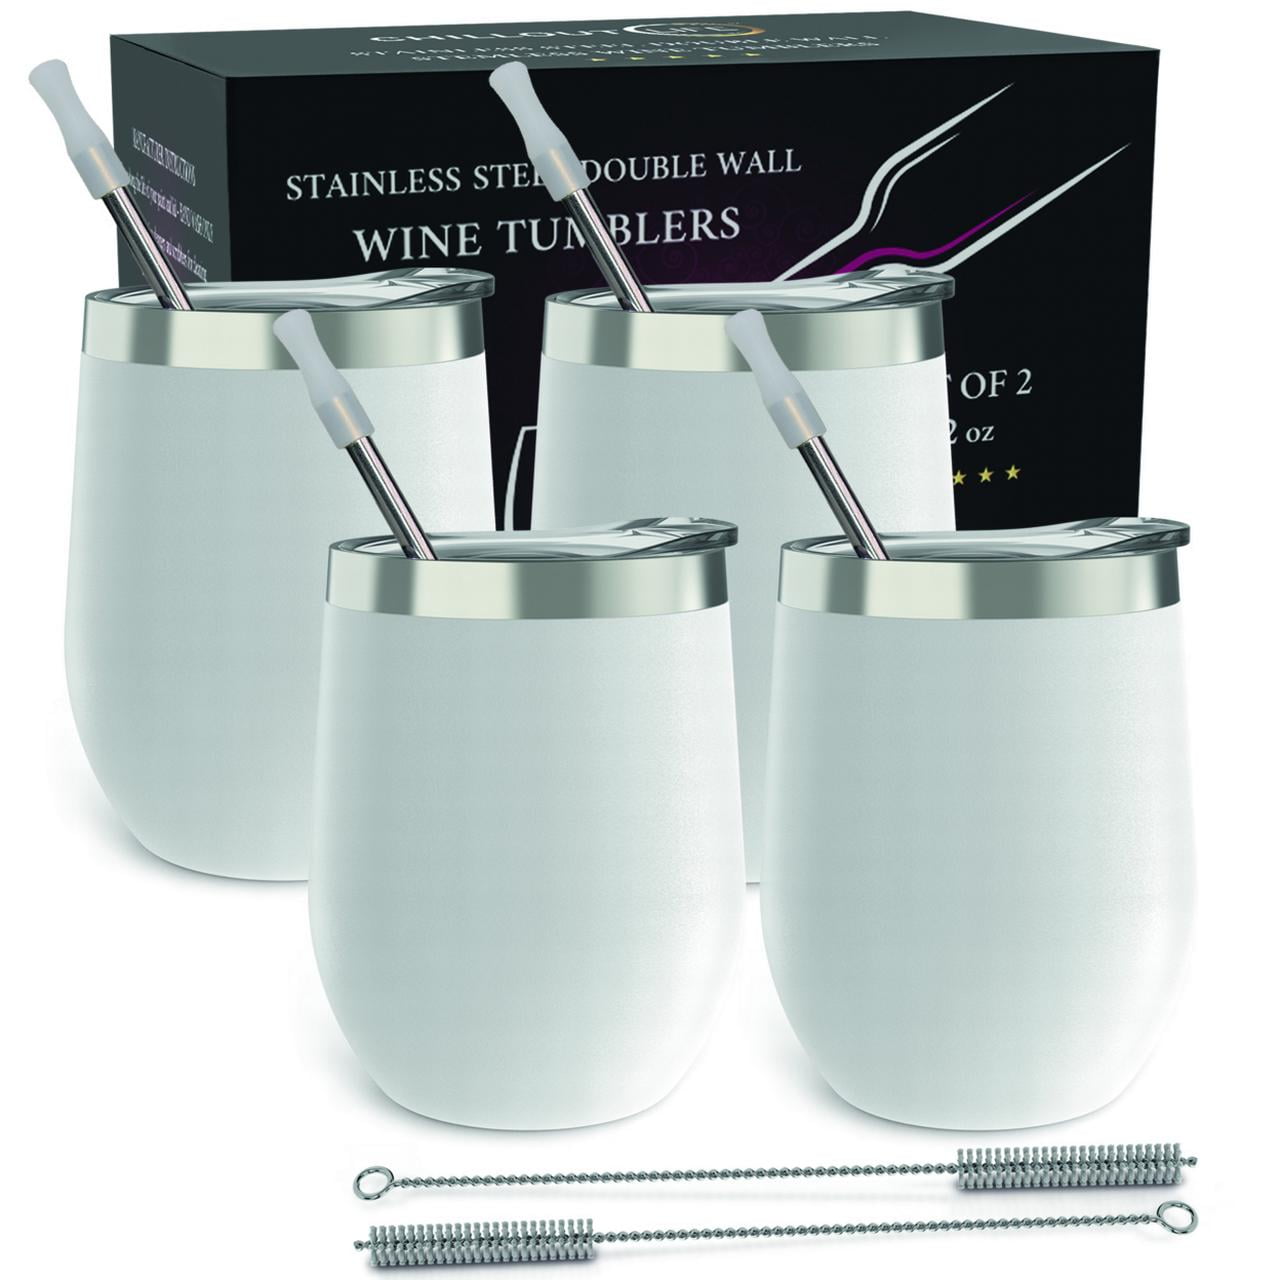 VEGOND Wine Tumblers Bulk 12 Pack, 12oz Stainless Steel Stemless Wine Glass  with Lids and Straws, Do…See more VEGOND Wine Tumblers Bulk 12 Pack, 12oz